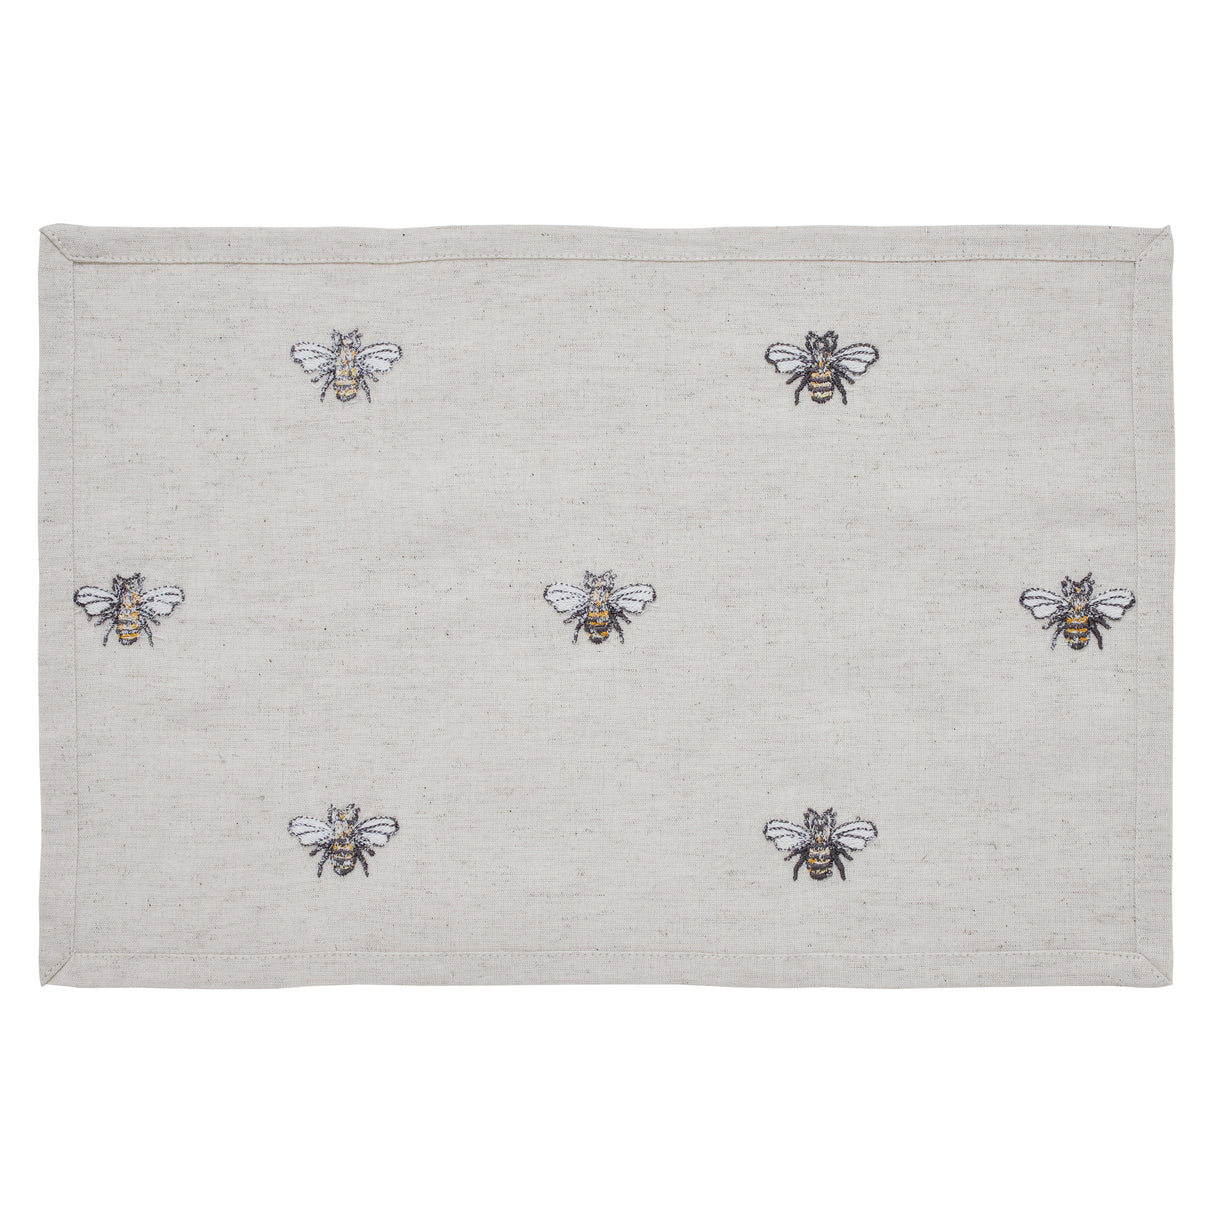 81268-Embroidered-Bee-Placemat-Set-of-6-12x18-image-6